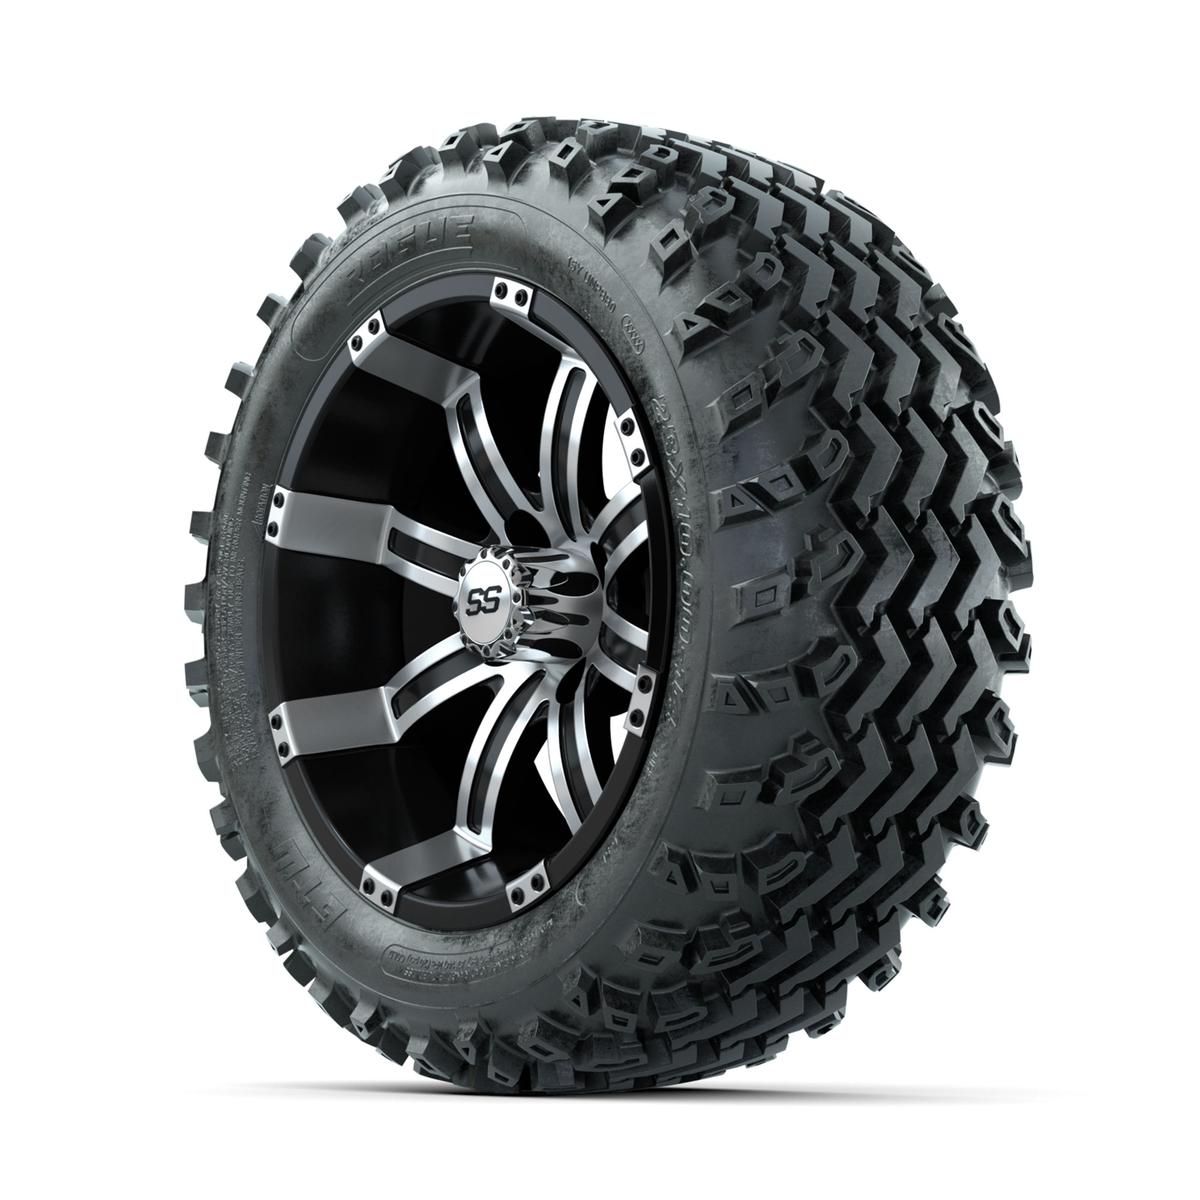 GTW Tempest Machined/Black 14 in Wheels with 23x10.00-14 Rogue All Terrain Tires – Full Set